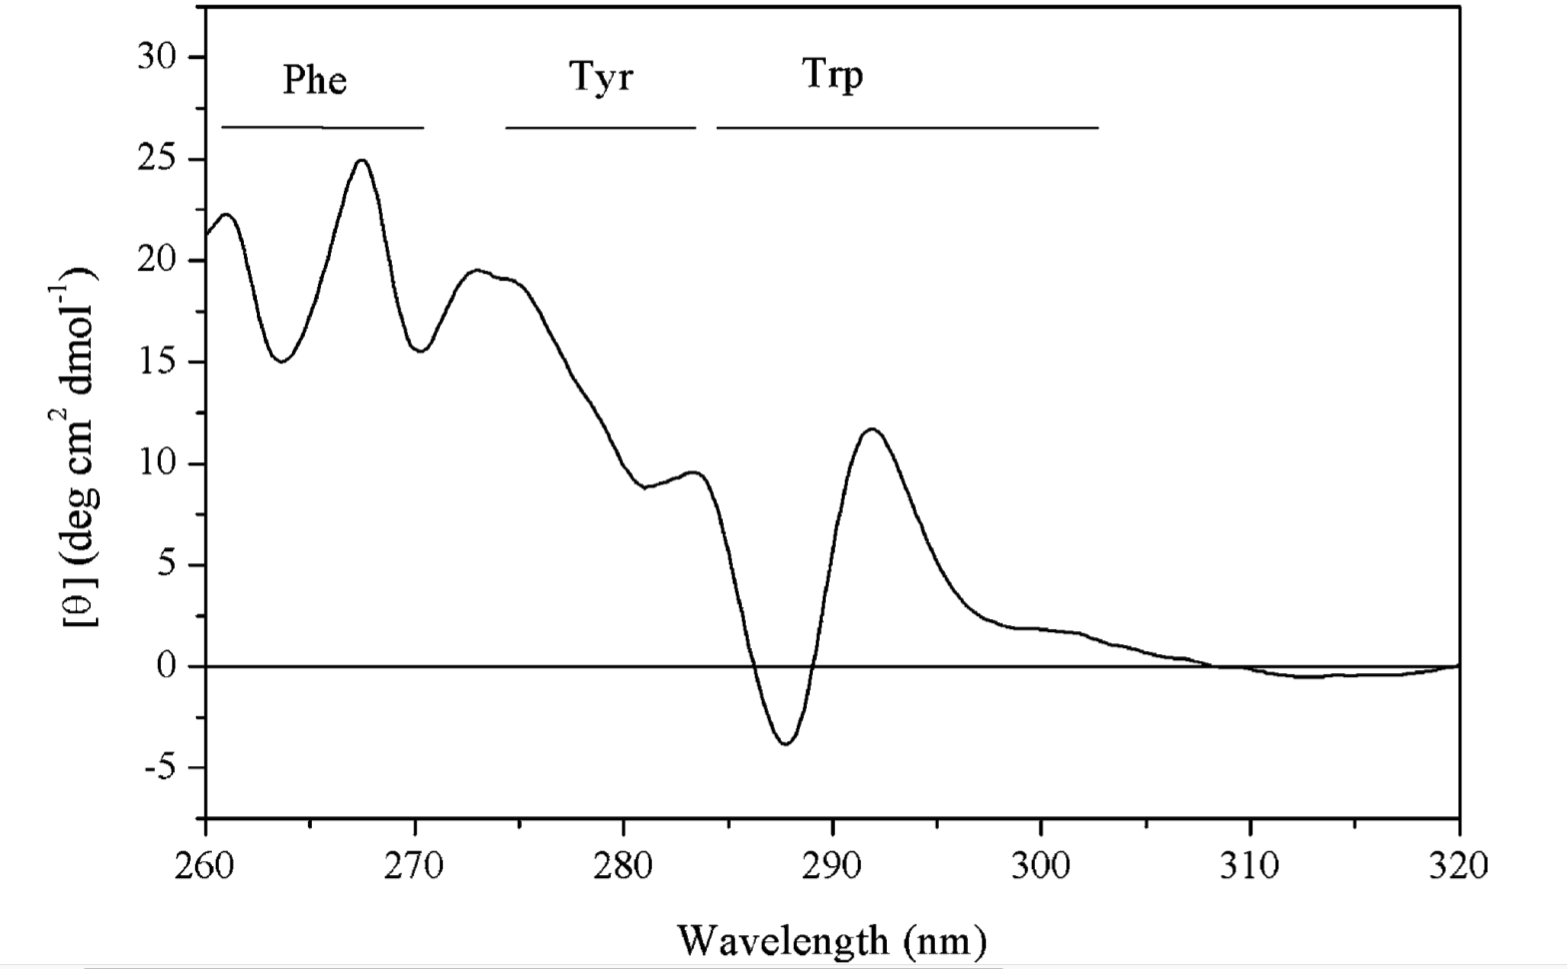 The near UV CD spectrum of a dehydroquinase, labelled with contribution from each aromatic amino acid side chain.